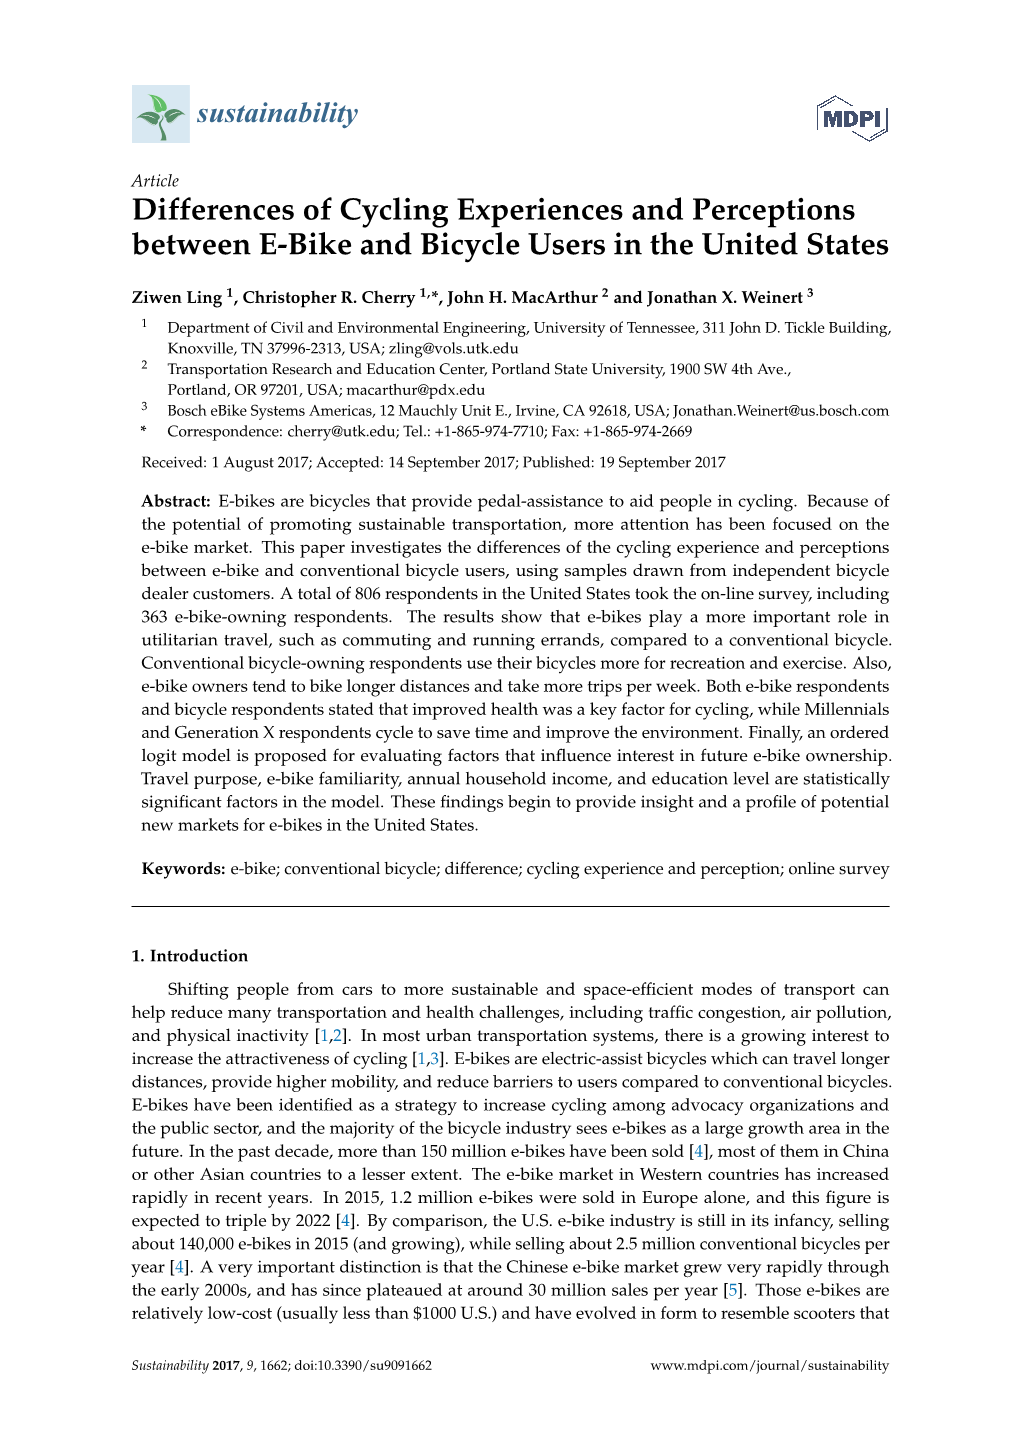 Differences of Cycling Experiences and Perceptions Between E-Bike and Bicycle Users in the United States